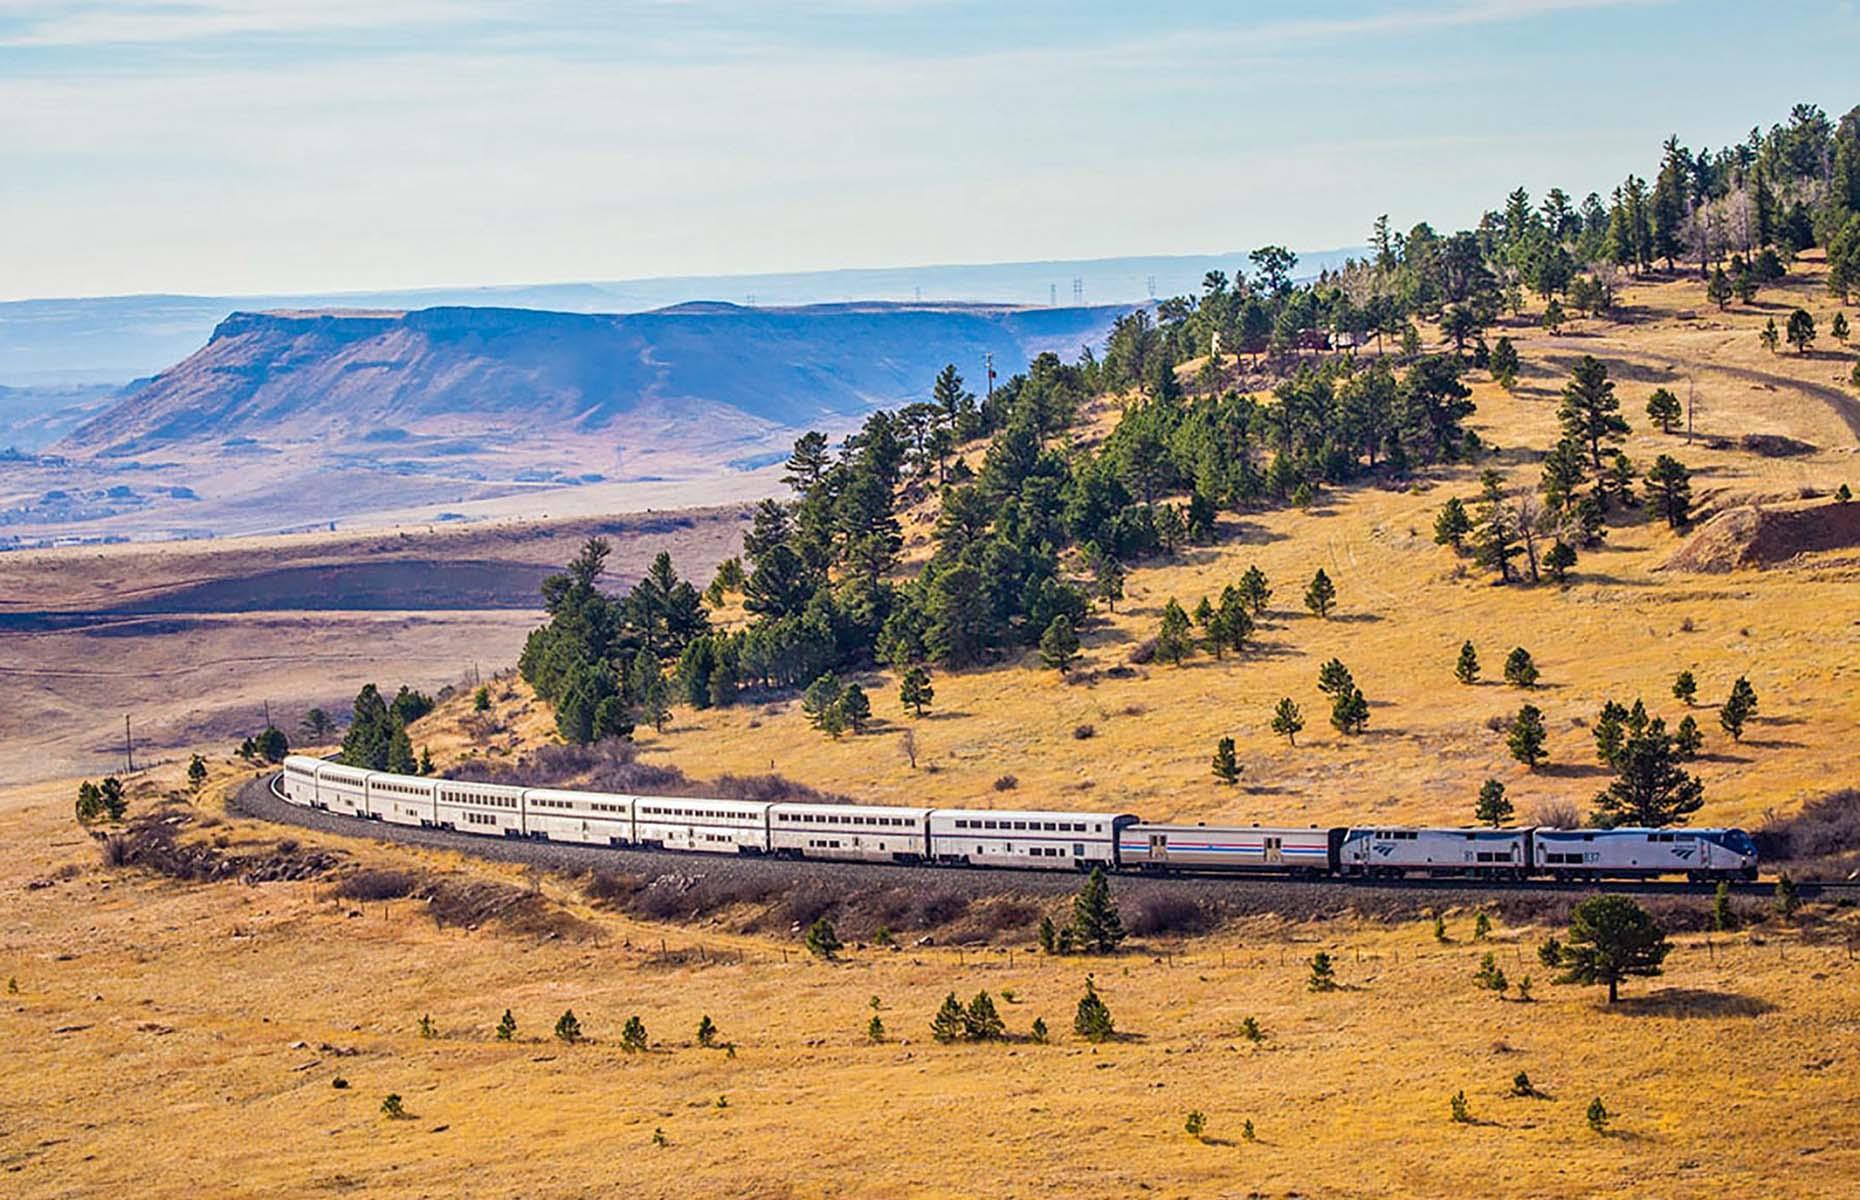 <p>Often dubbed the ultimate cross-country rail trip by enthusiasts, <a href="https://www.amtrak.com/california-zephyr-train">this epic 2,438-mile (3,924km), 51-hour journey</a> between Chicago and San Francisco is undeniably breathtaking. From the majestic mountain ranges of the Rockies and the Sierra Nevada to the bright-red hues of Utah’s deserts and the seemingly endless plains of Nebraska, expect fabulous scenery from start to finish. </p>